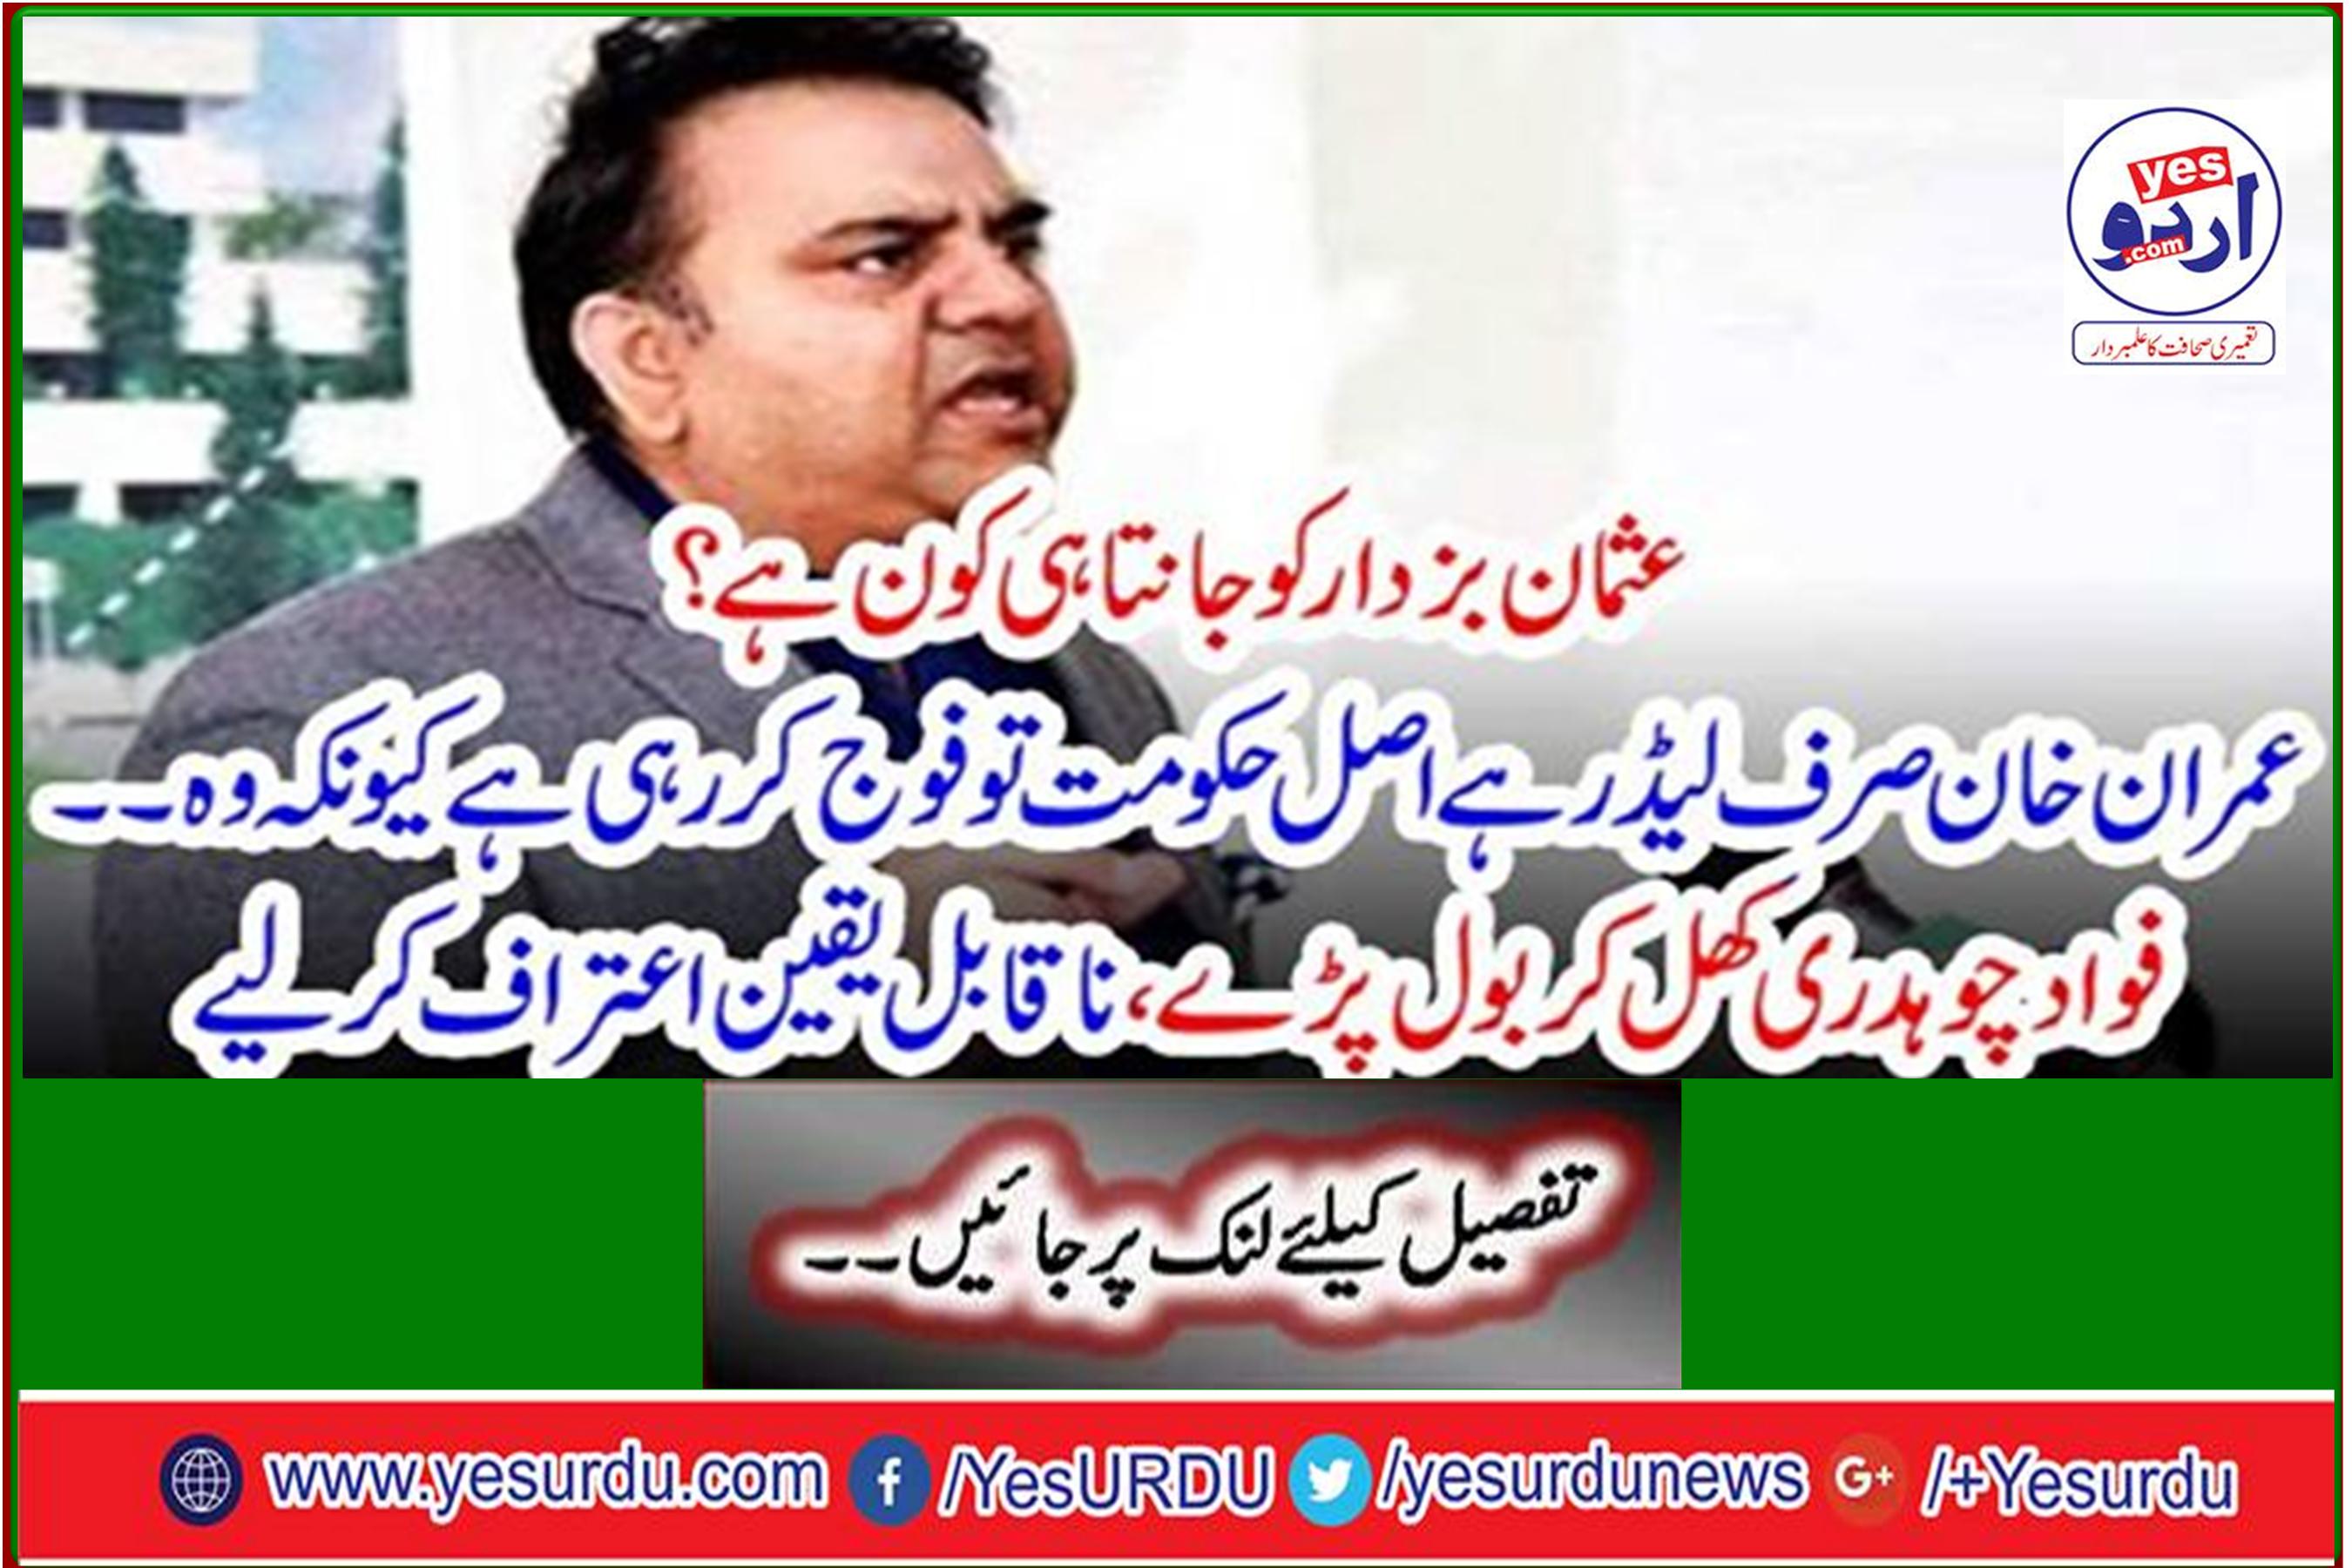 Fawad Chaudhry spoke openly, making an incredible confession